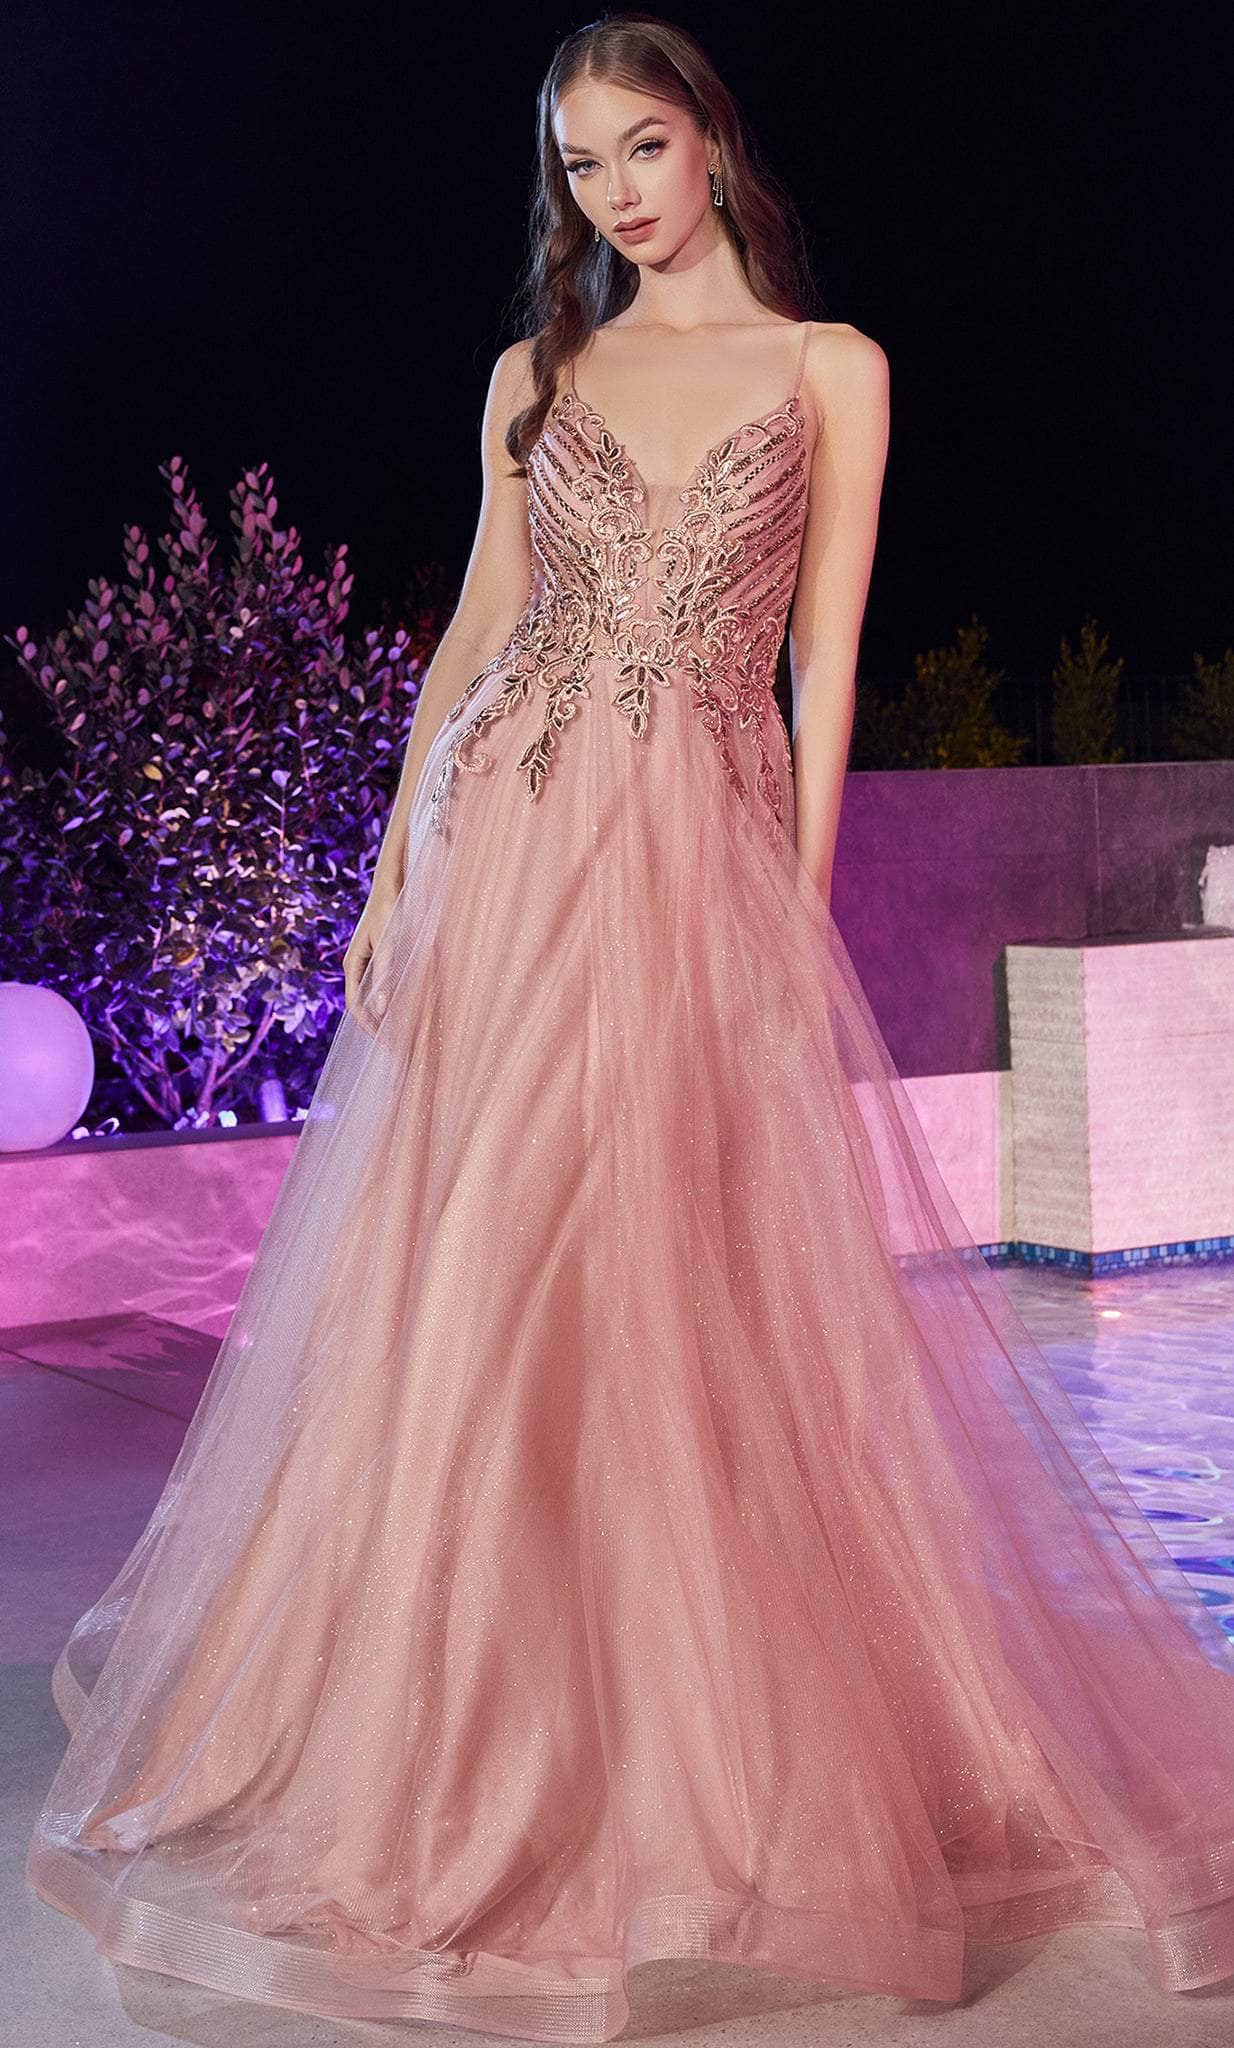 Image of Ladivine CD874 - Applique Tulle Long Classic Prom Dress